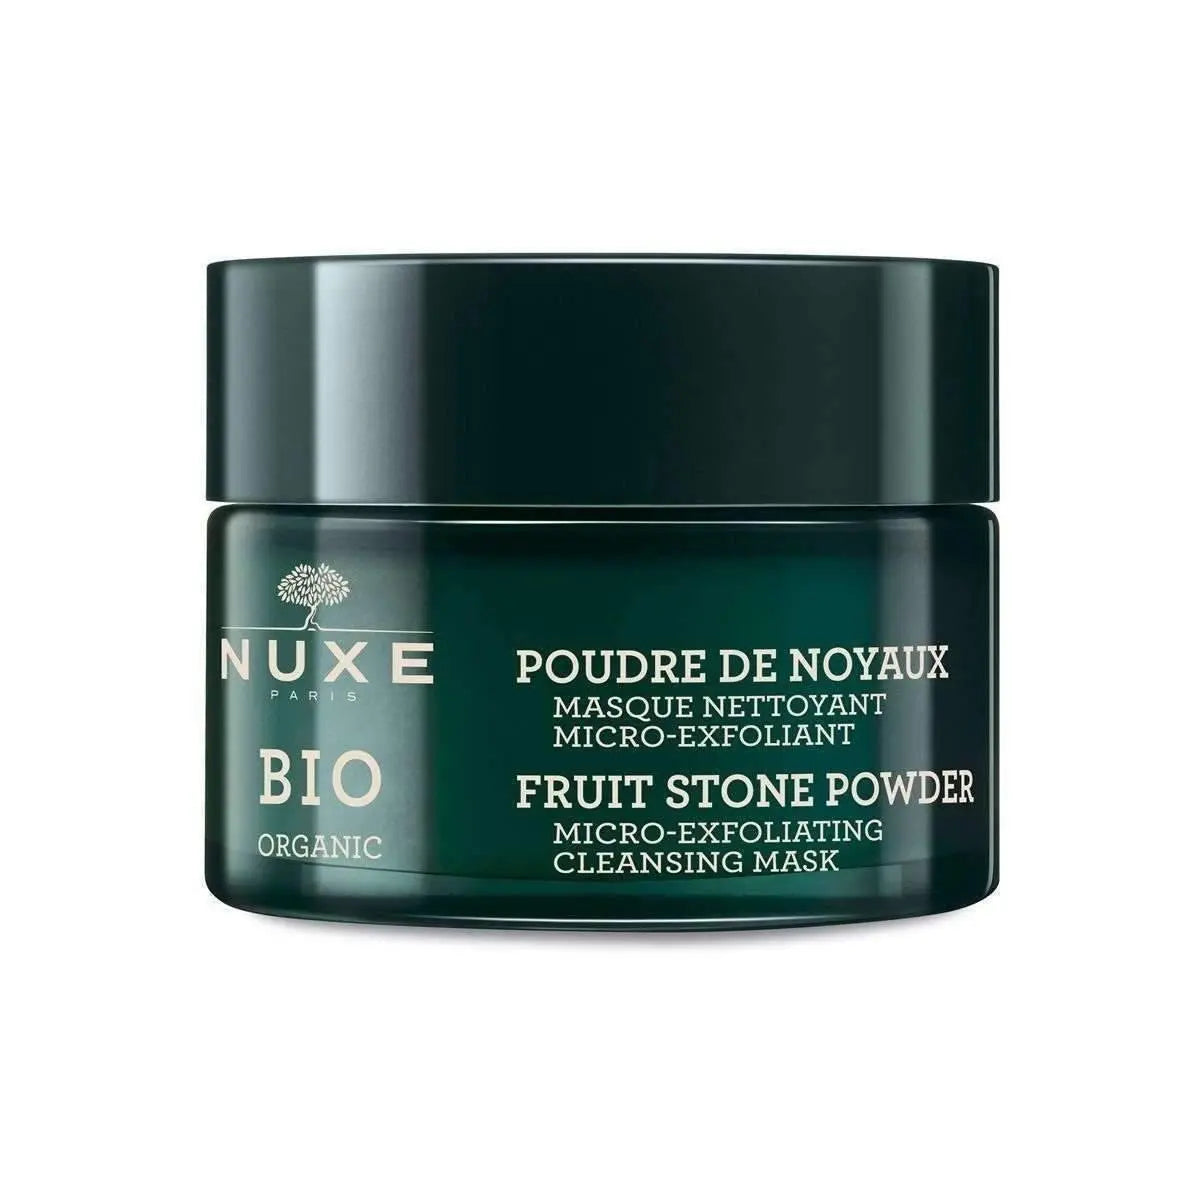 NUXE BIO ORGANIC Micro Exfoliating Cleansing Mask 50ml % | product_vendor%